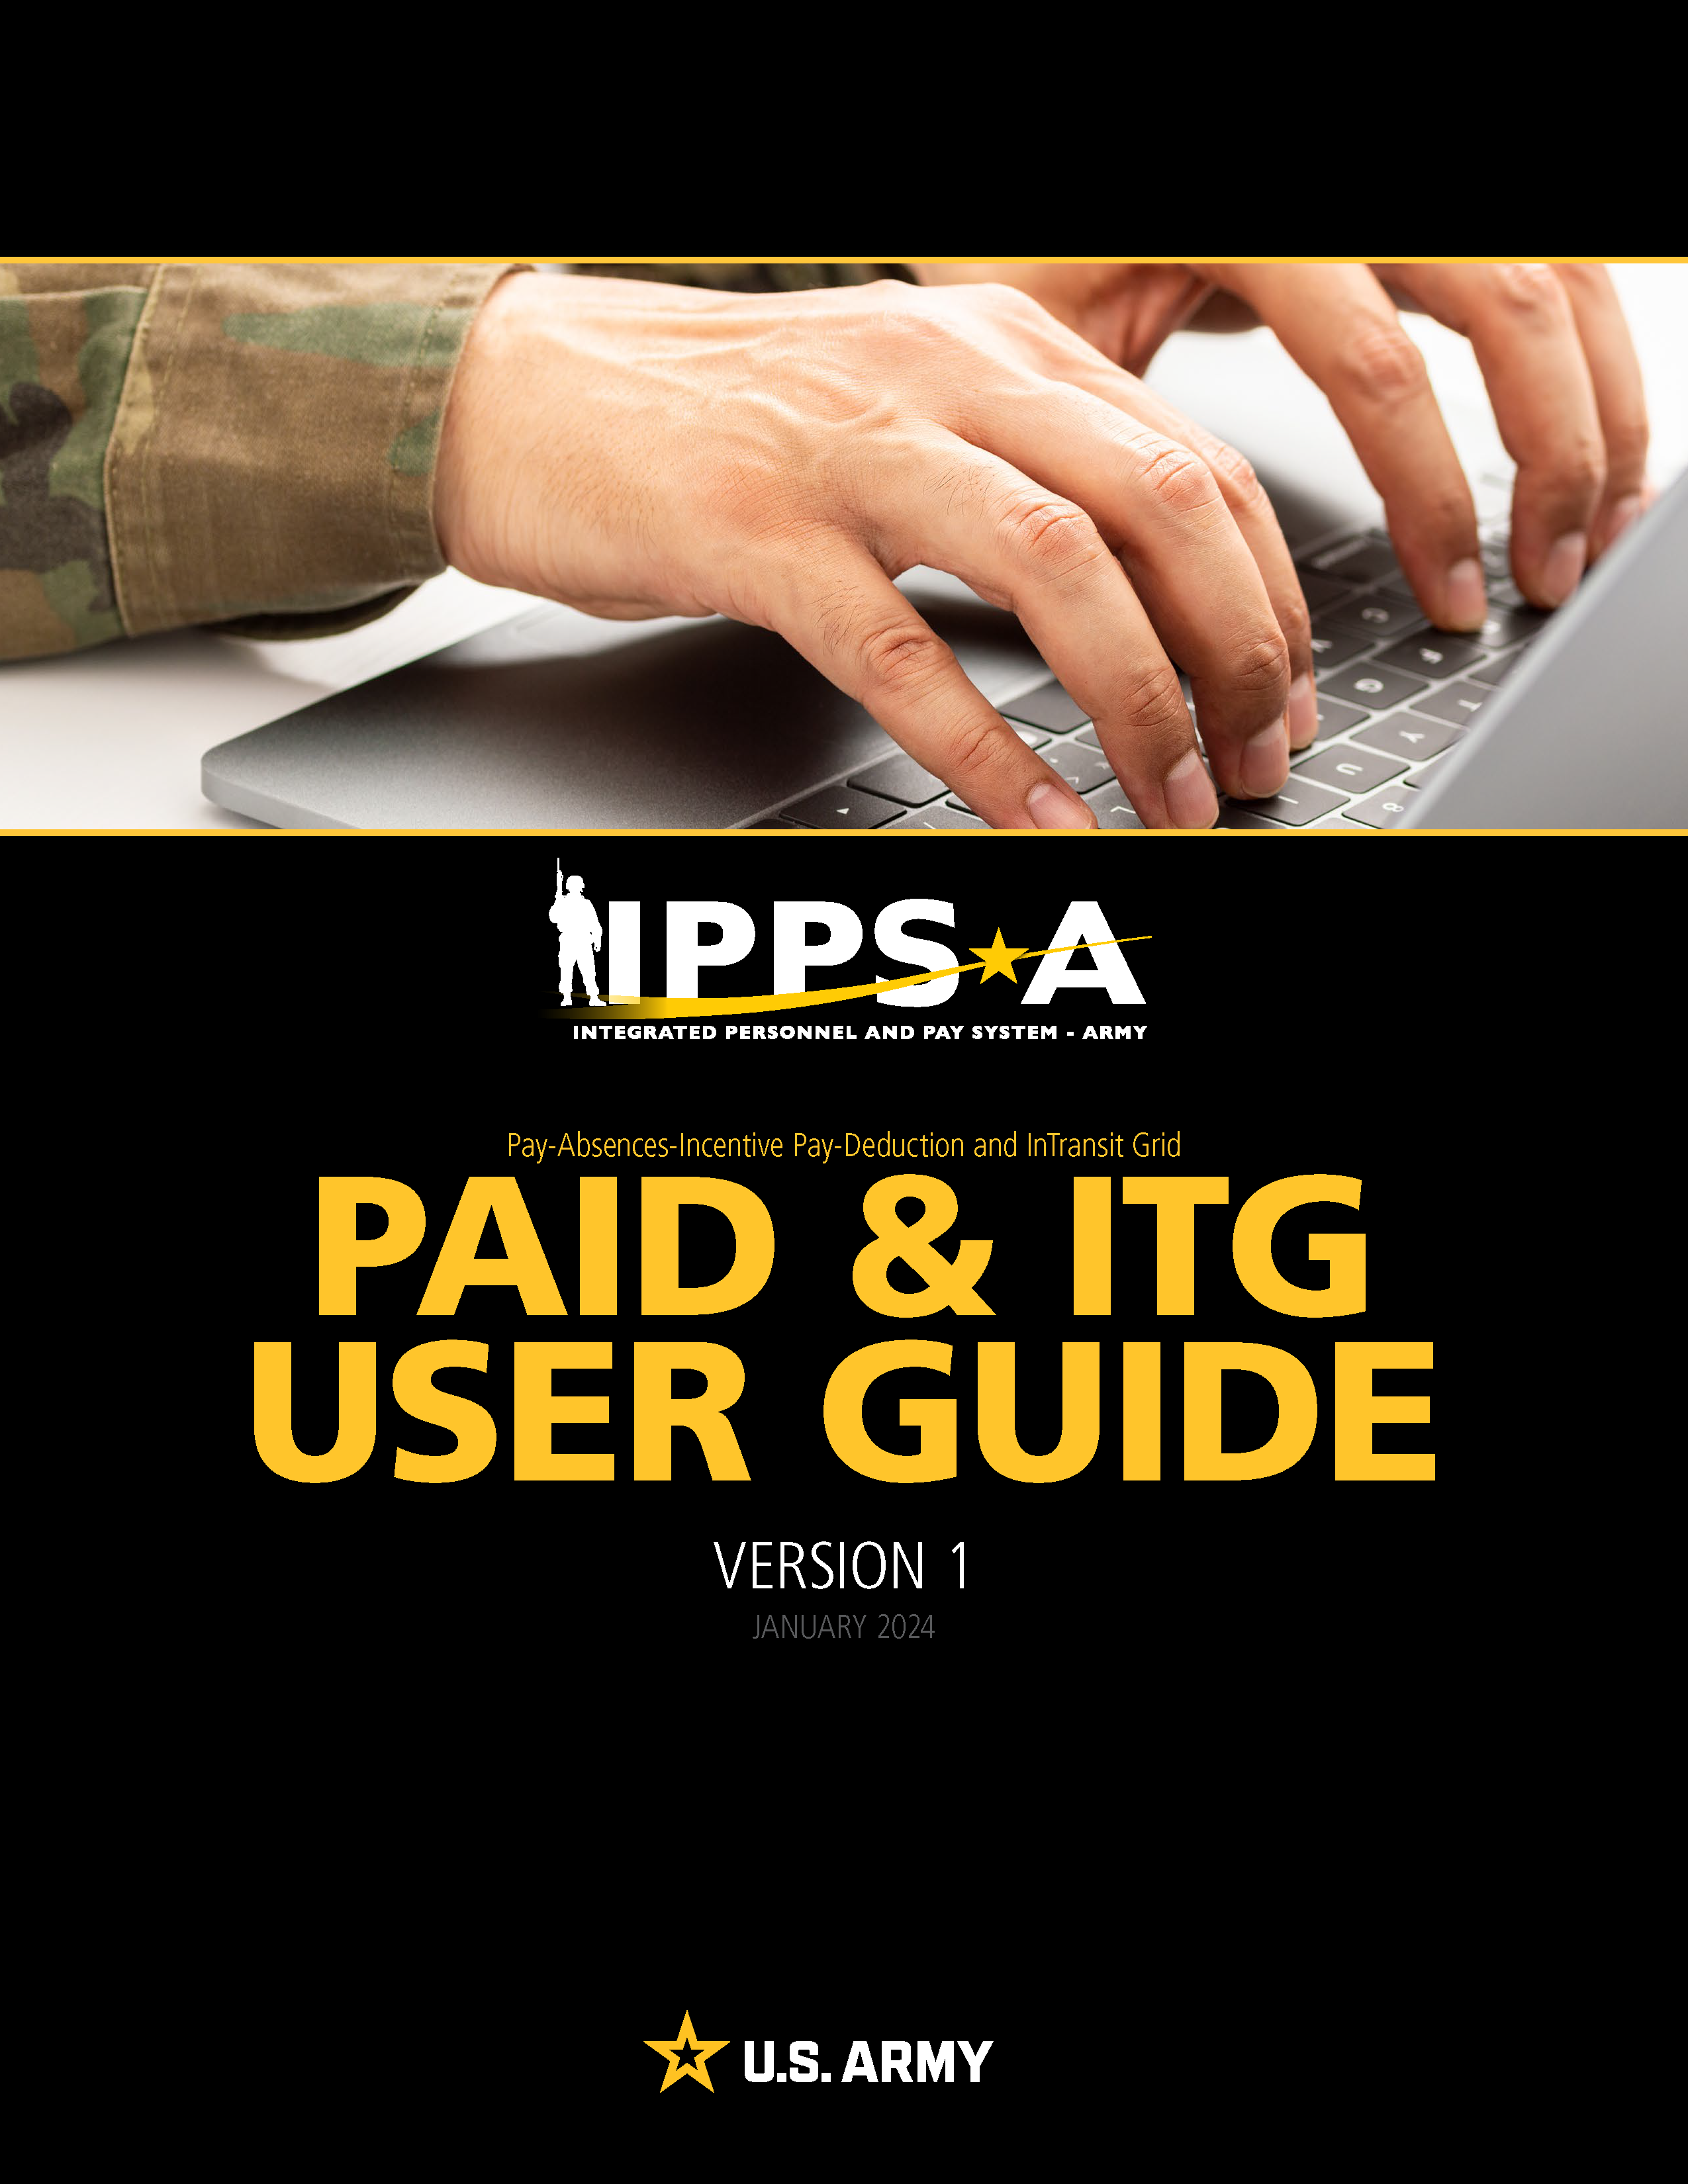 Link to PAID & ITG Guide